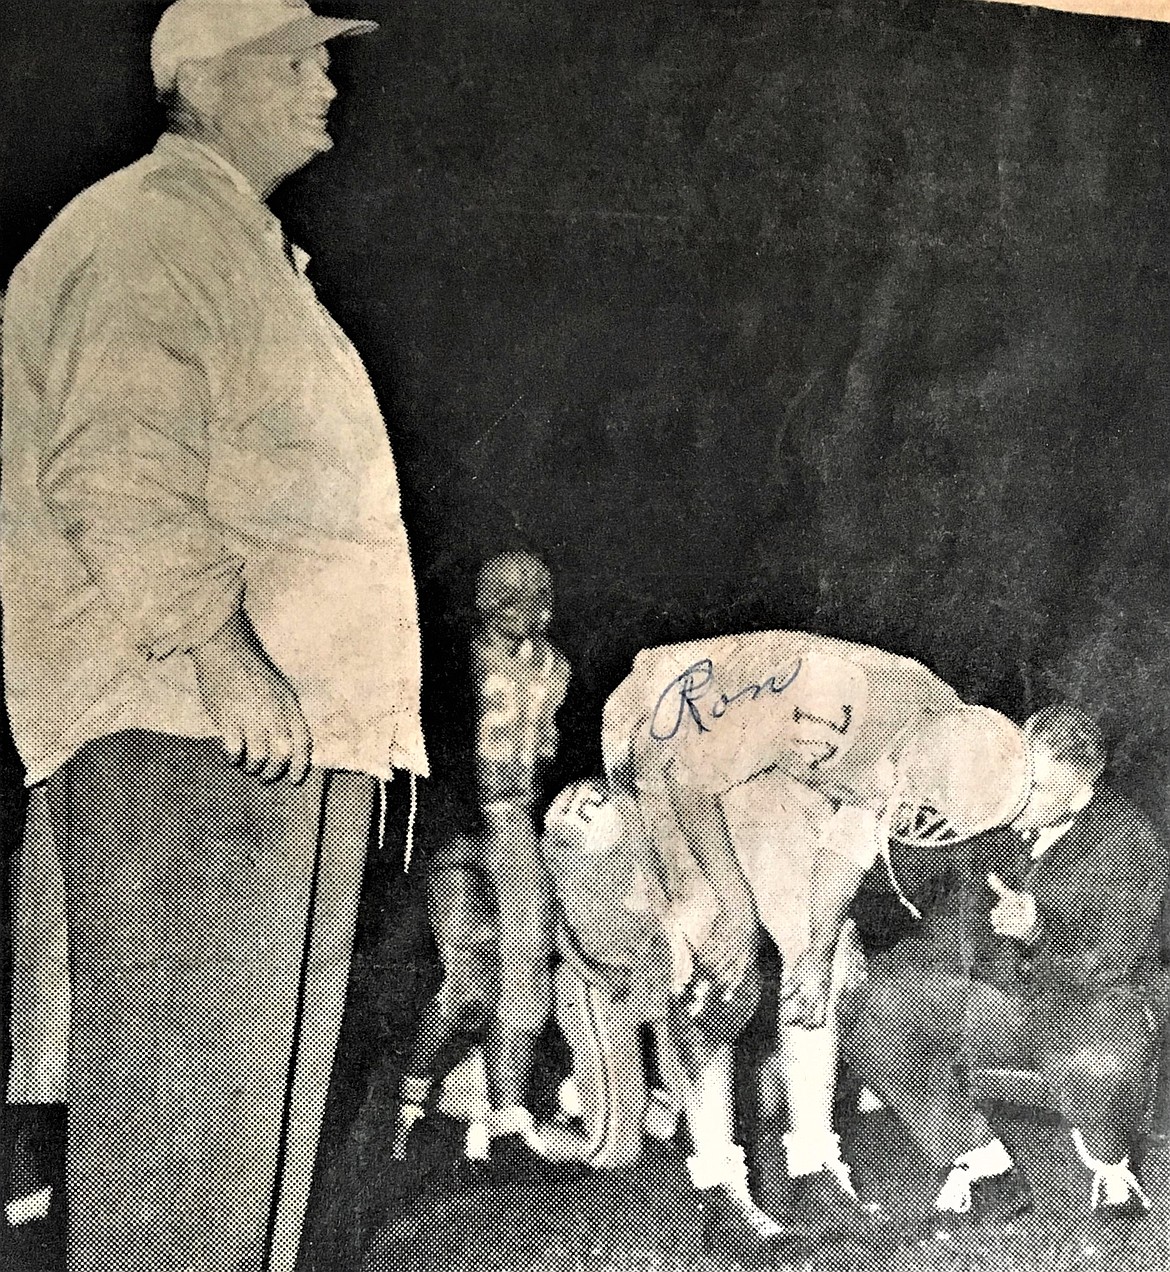 On Oct. 30, 1964, CHS senior lineman Ron Hodge gets instruction from assistant coach Tom Robb, while famed Vik coach Cotton Barlow looks on. Robb, who died Jan. 24, later opened and ran the iconic Iron Horse restaurant.